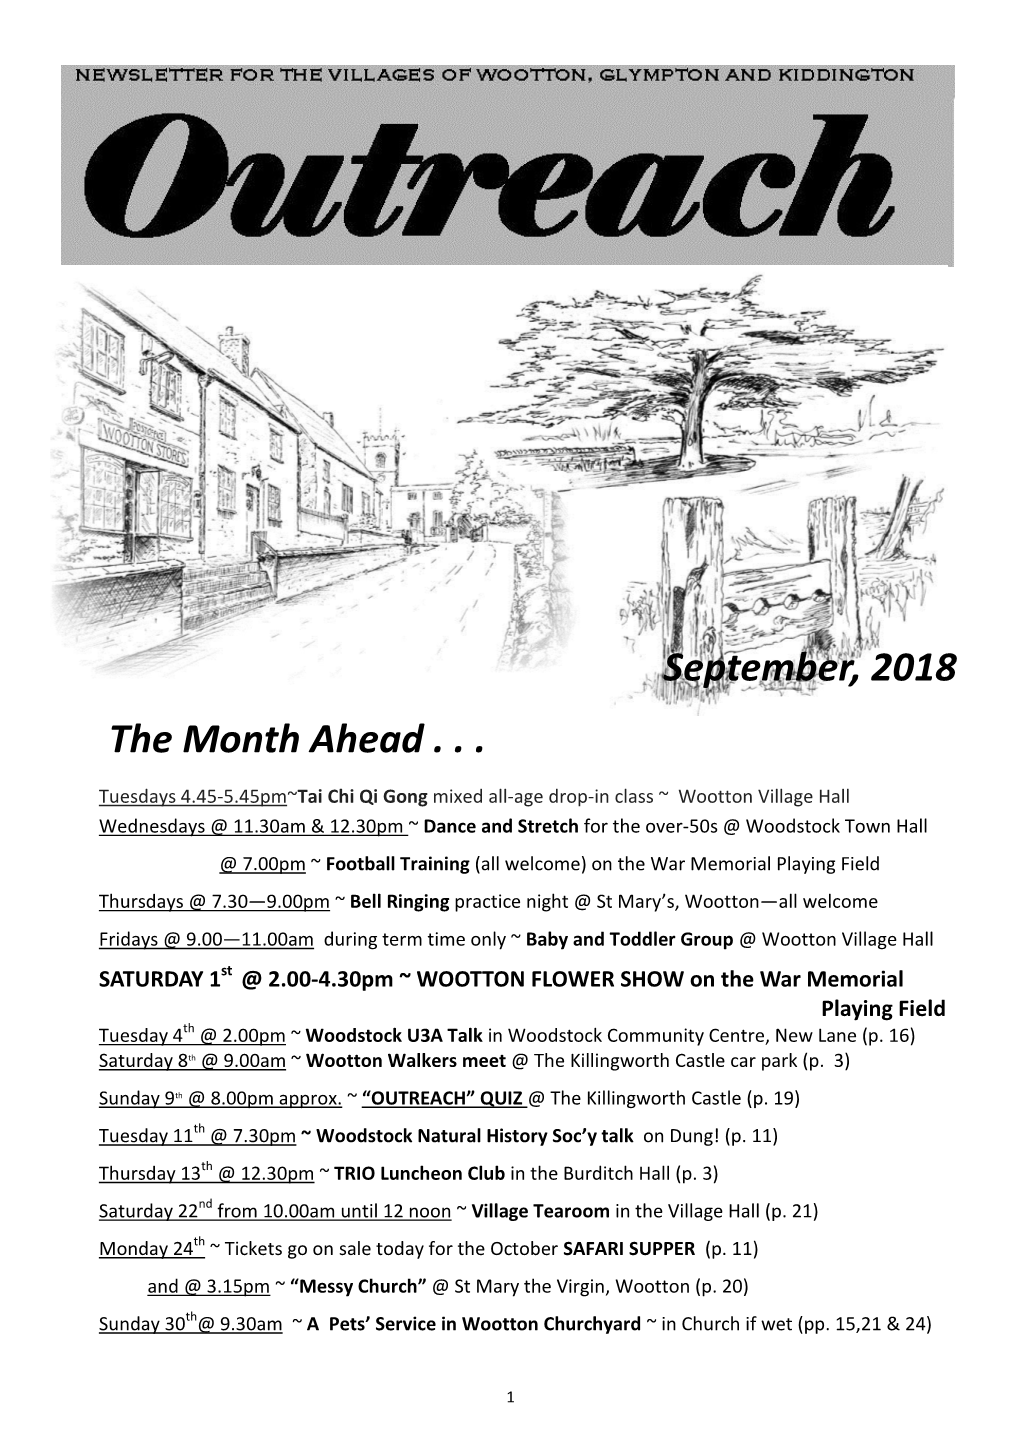 September, 2018 the Month Ahead